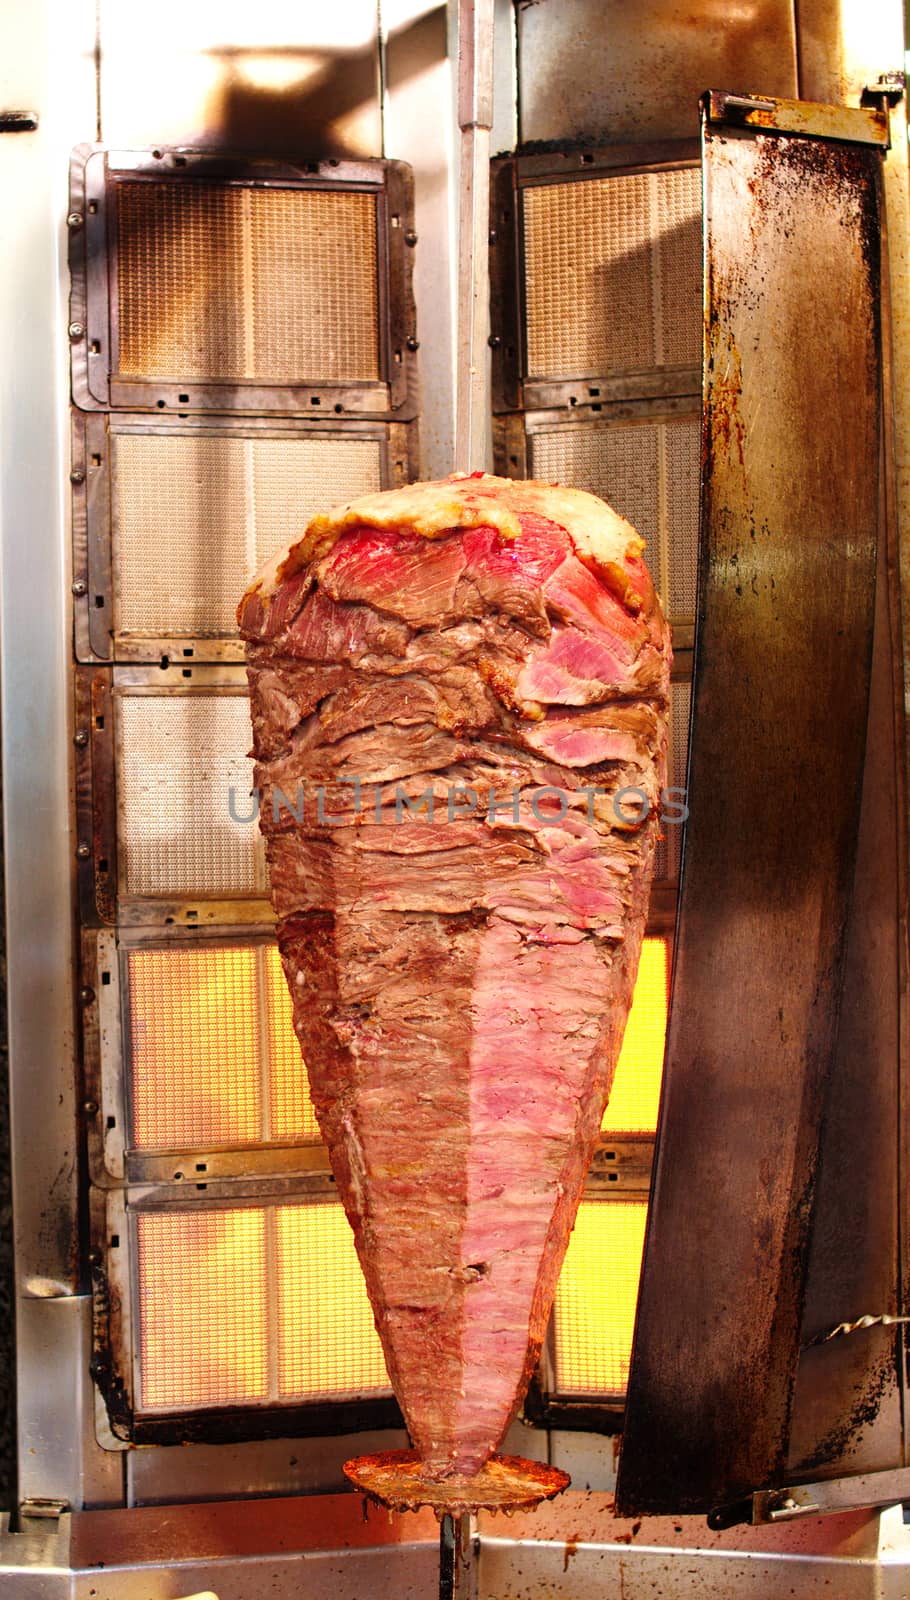 Doner kebab is a Turkish kebab, made of meat cooked on a vertical rotisserie.